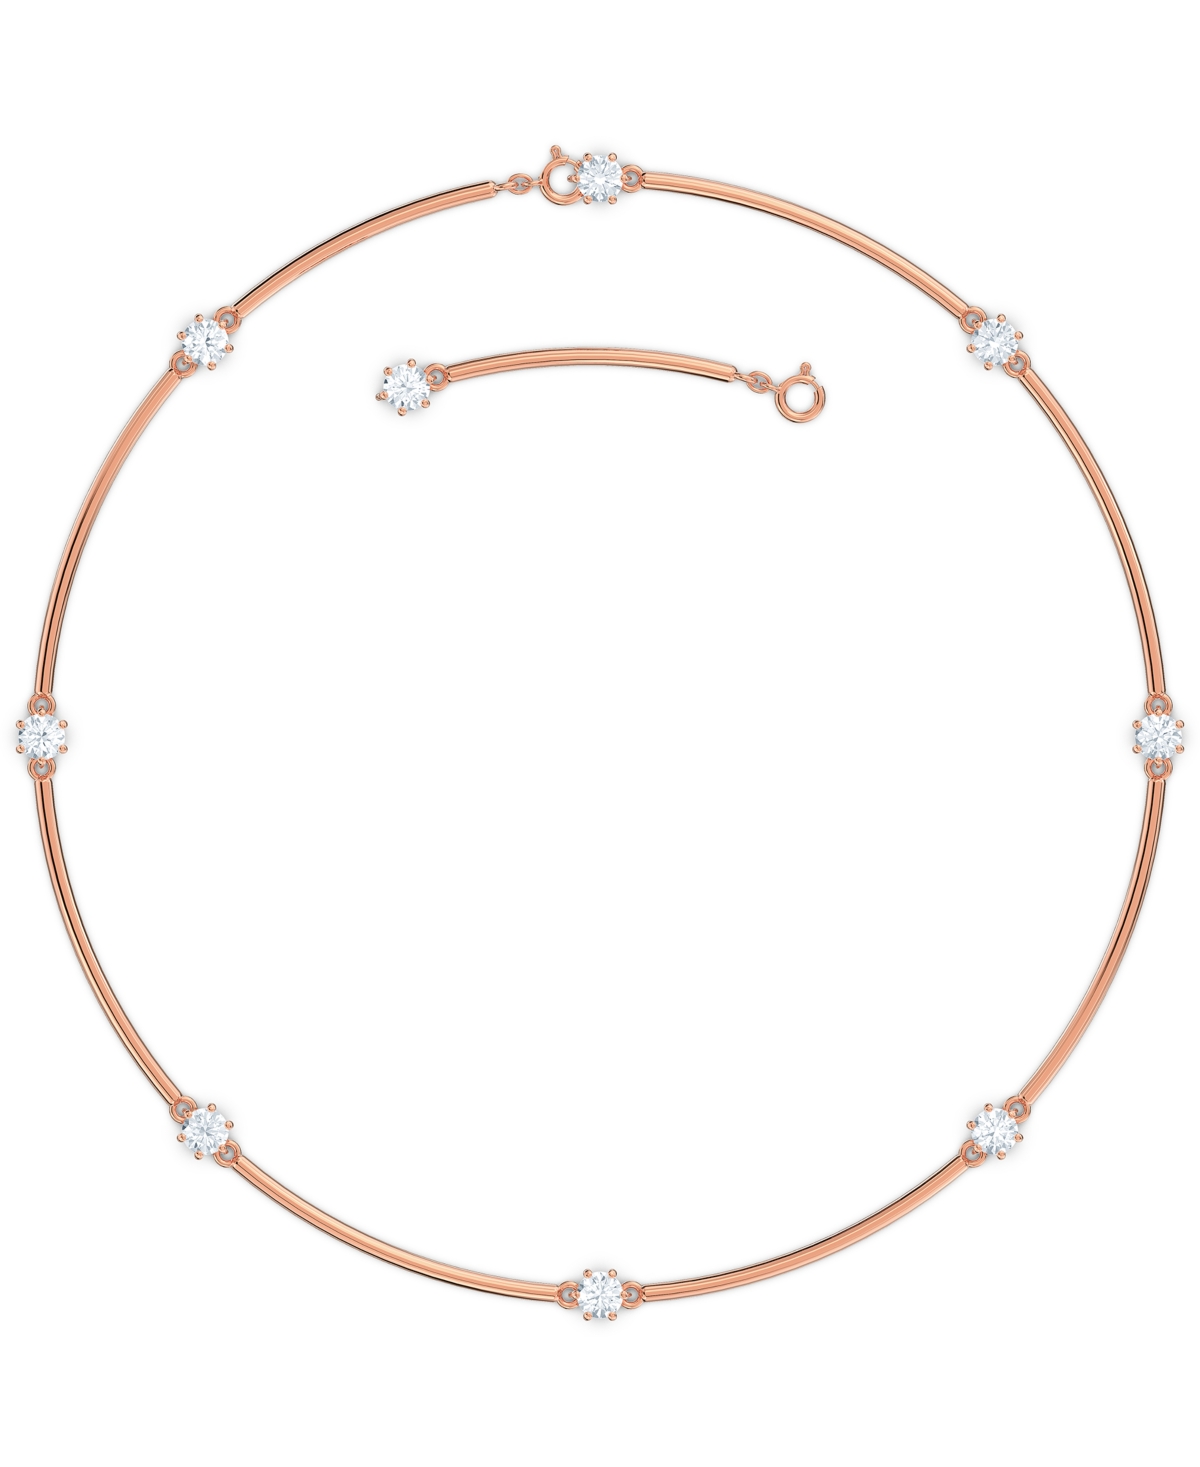 Rose Gold-Tone Crystal Station Choker Necklace, 15" + 2" extender - White